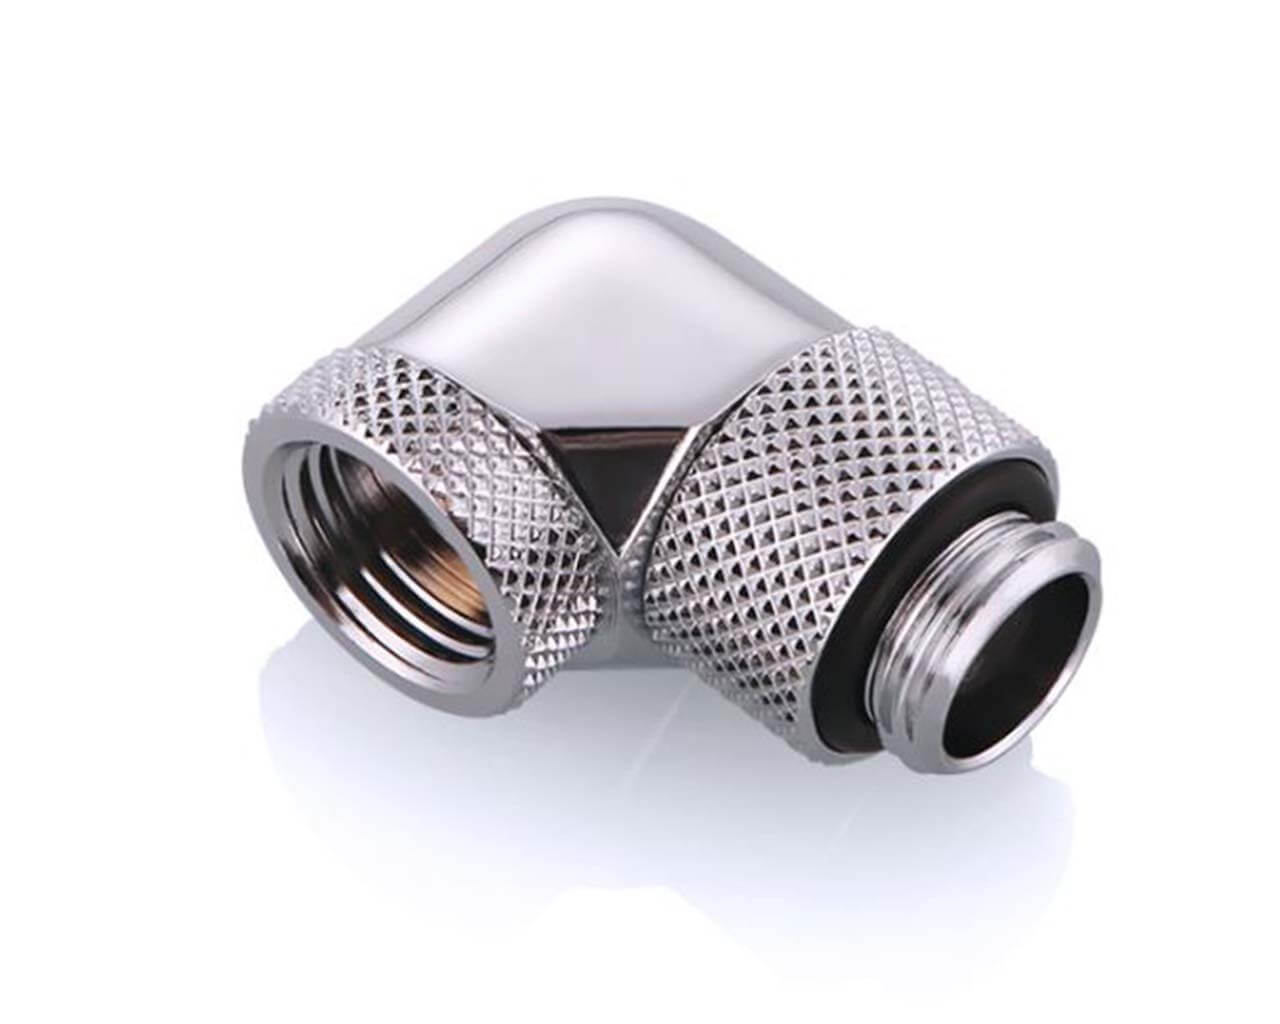 Bykski G 1/4in. Male to Female 90 Degree Dual Rotary Elbow Fitting (B-DTSO-RD90) - PrimoChill - KEEPING IT COOL Silver